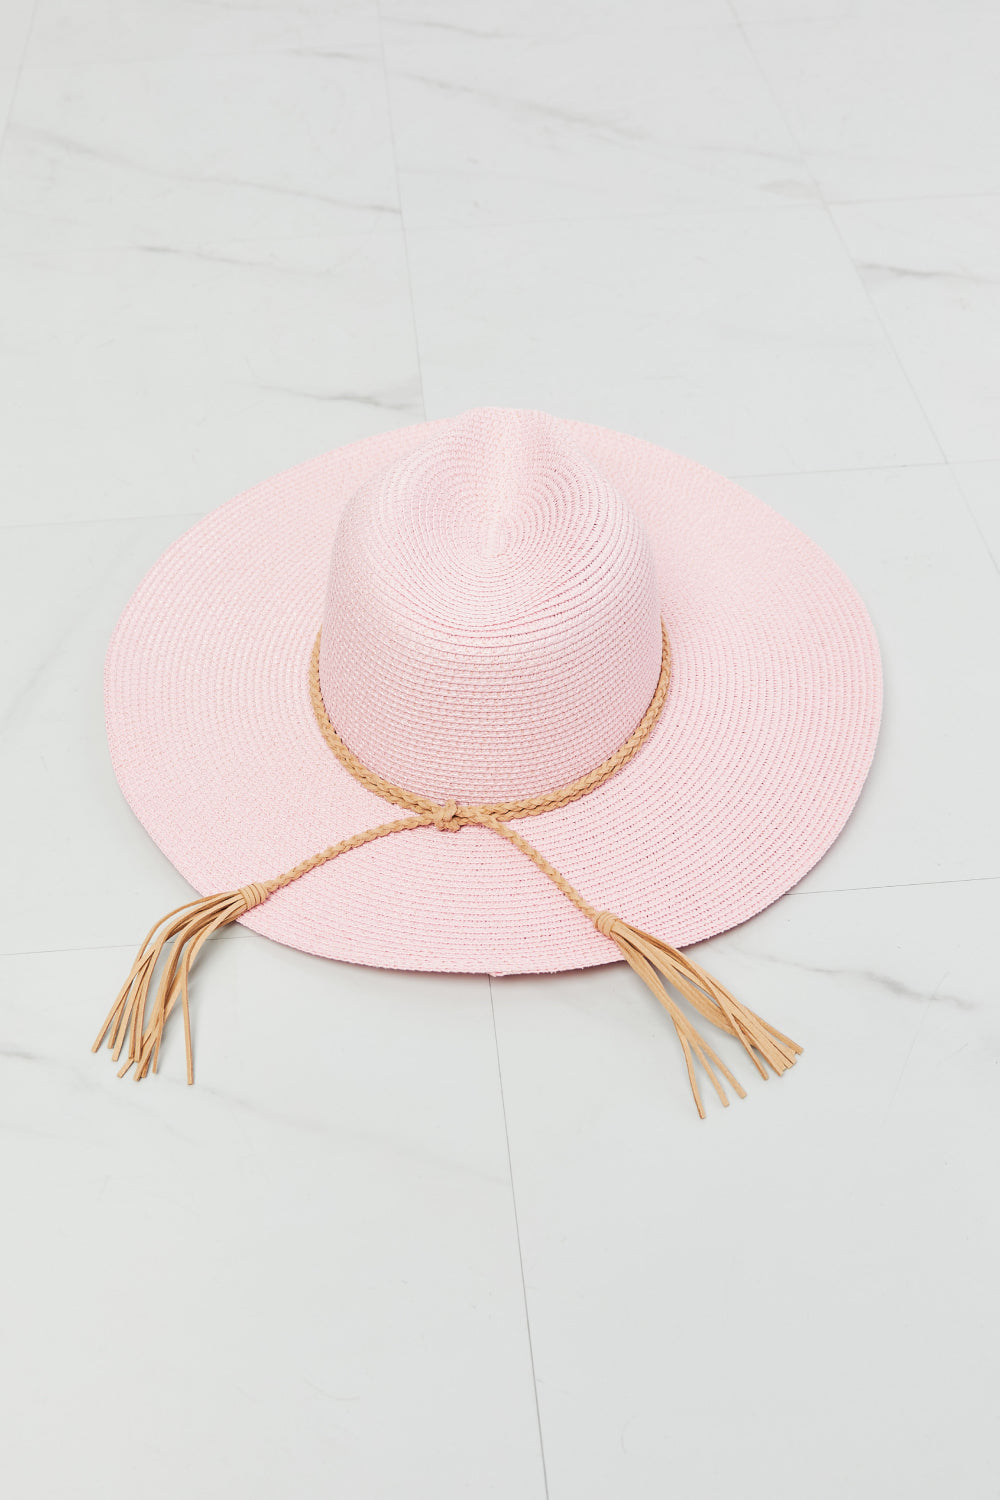 Rancher Straw Hat: A rustic and stylish hat crafted from straw, reminiscent of the classic rancher's headwear, ideal for a Western-inspired look.